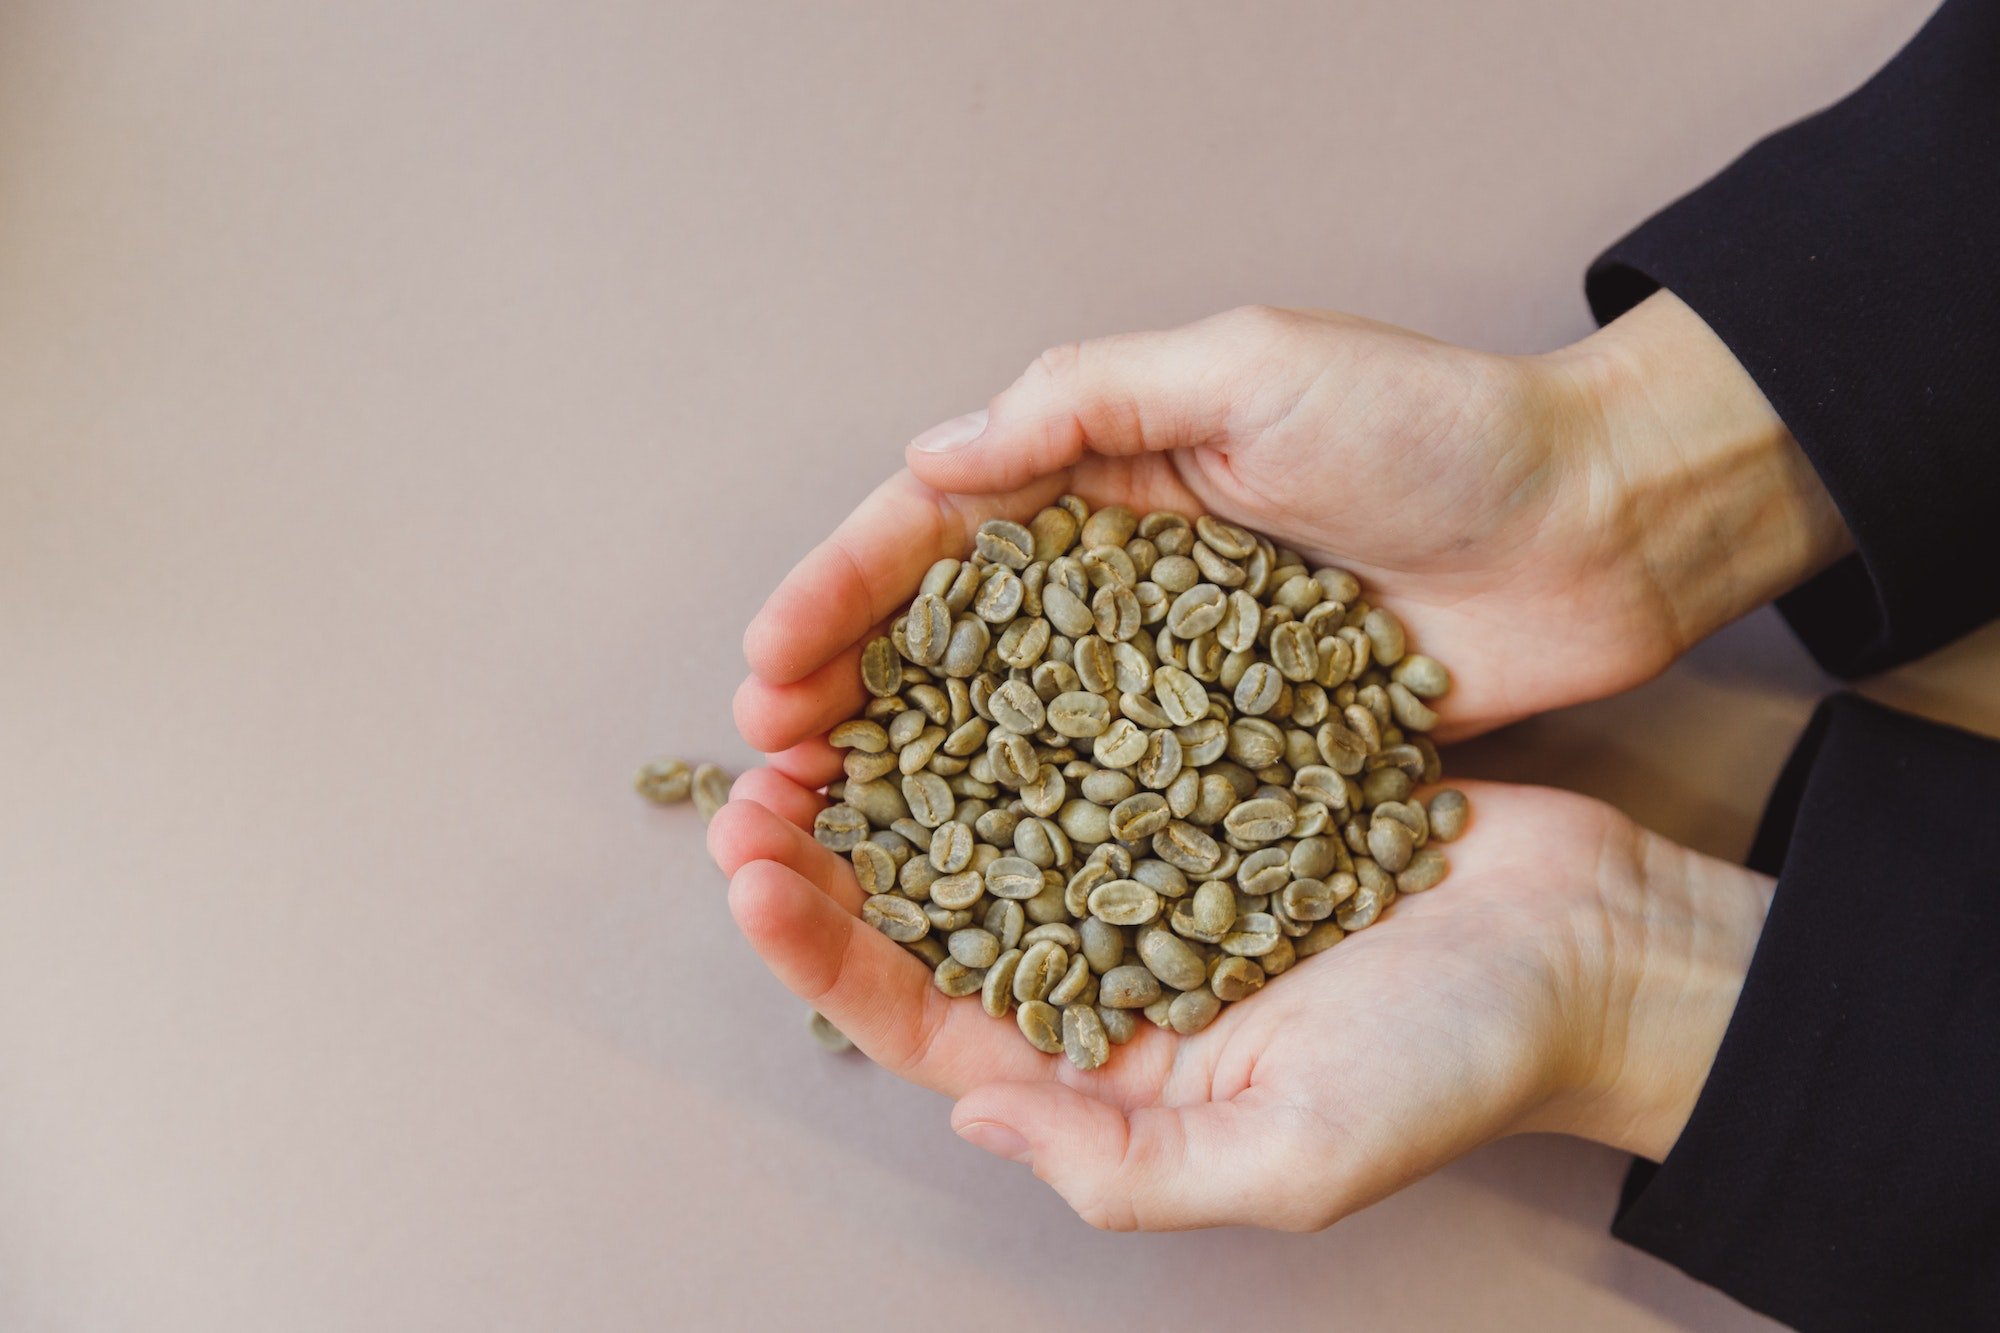 Green coffee beans in woman's hands.